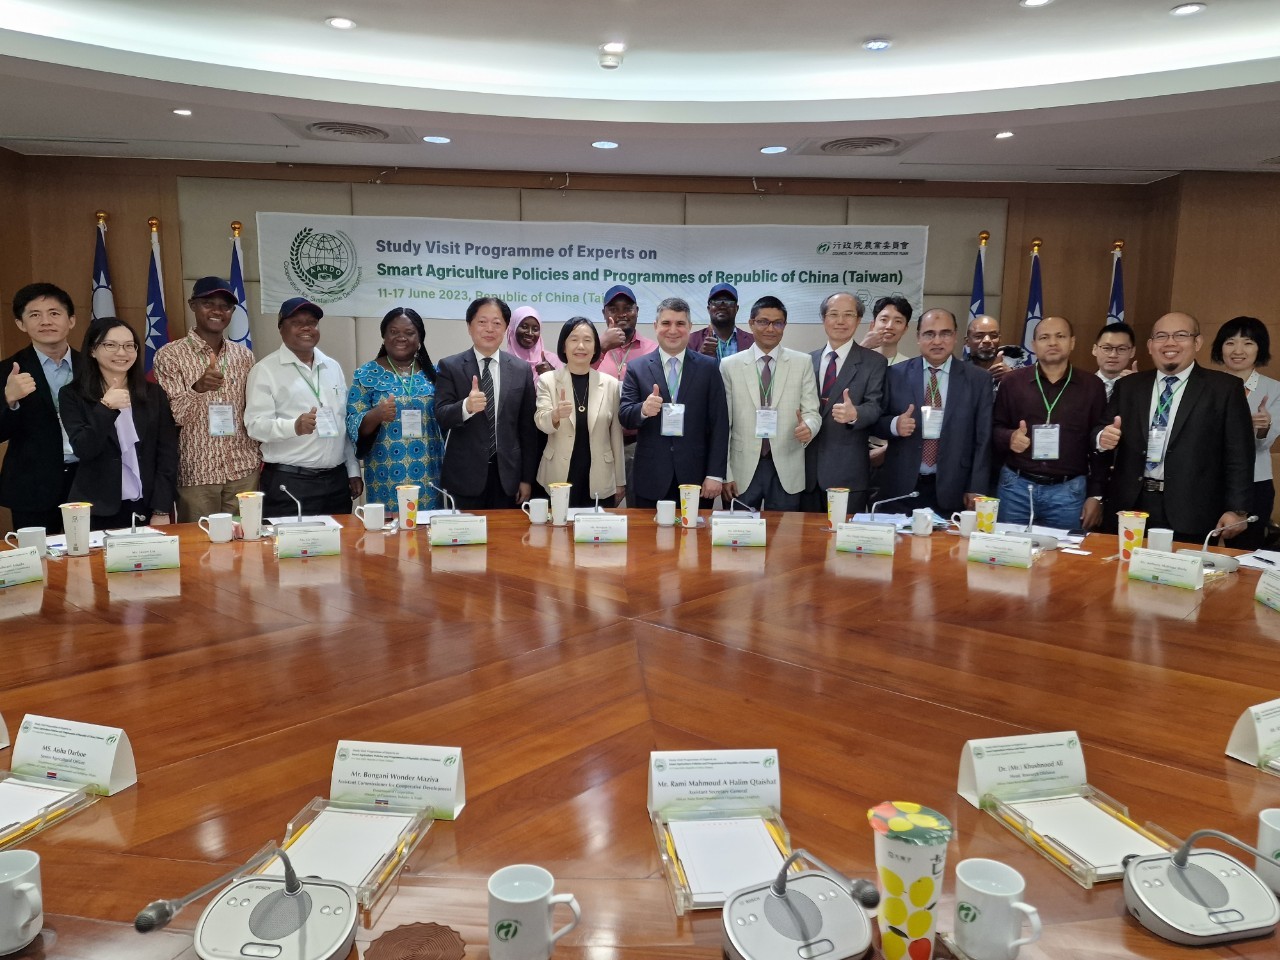 Figure 1：A group photo for the AARDO Study Visit Programme of Experts on Smart Agriculture Policies and Programmes of Republic of China (Taiwan).